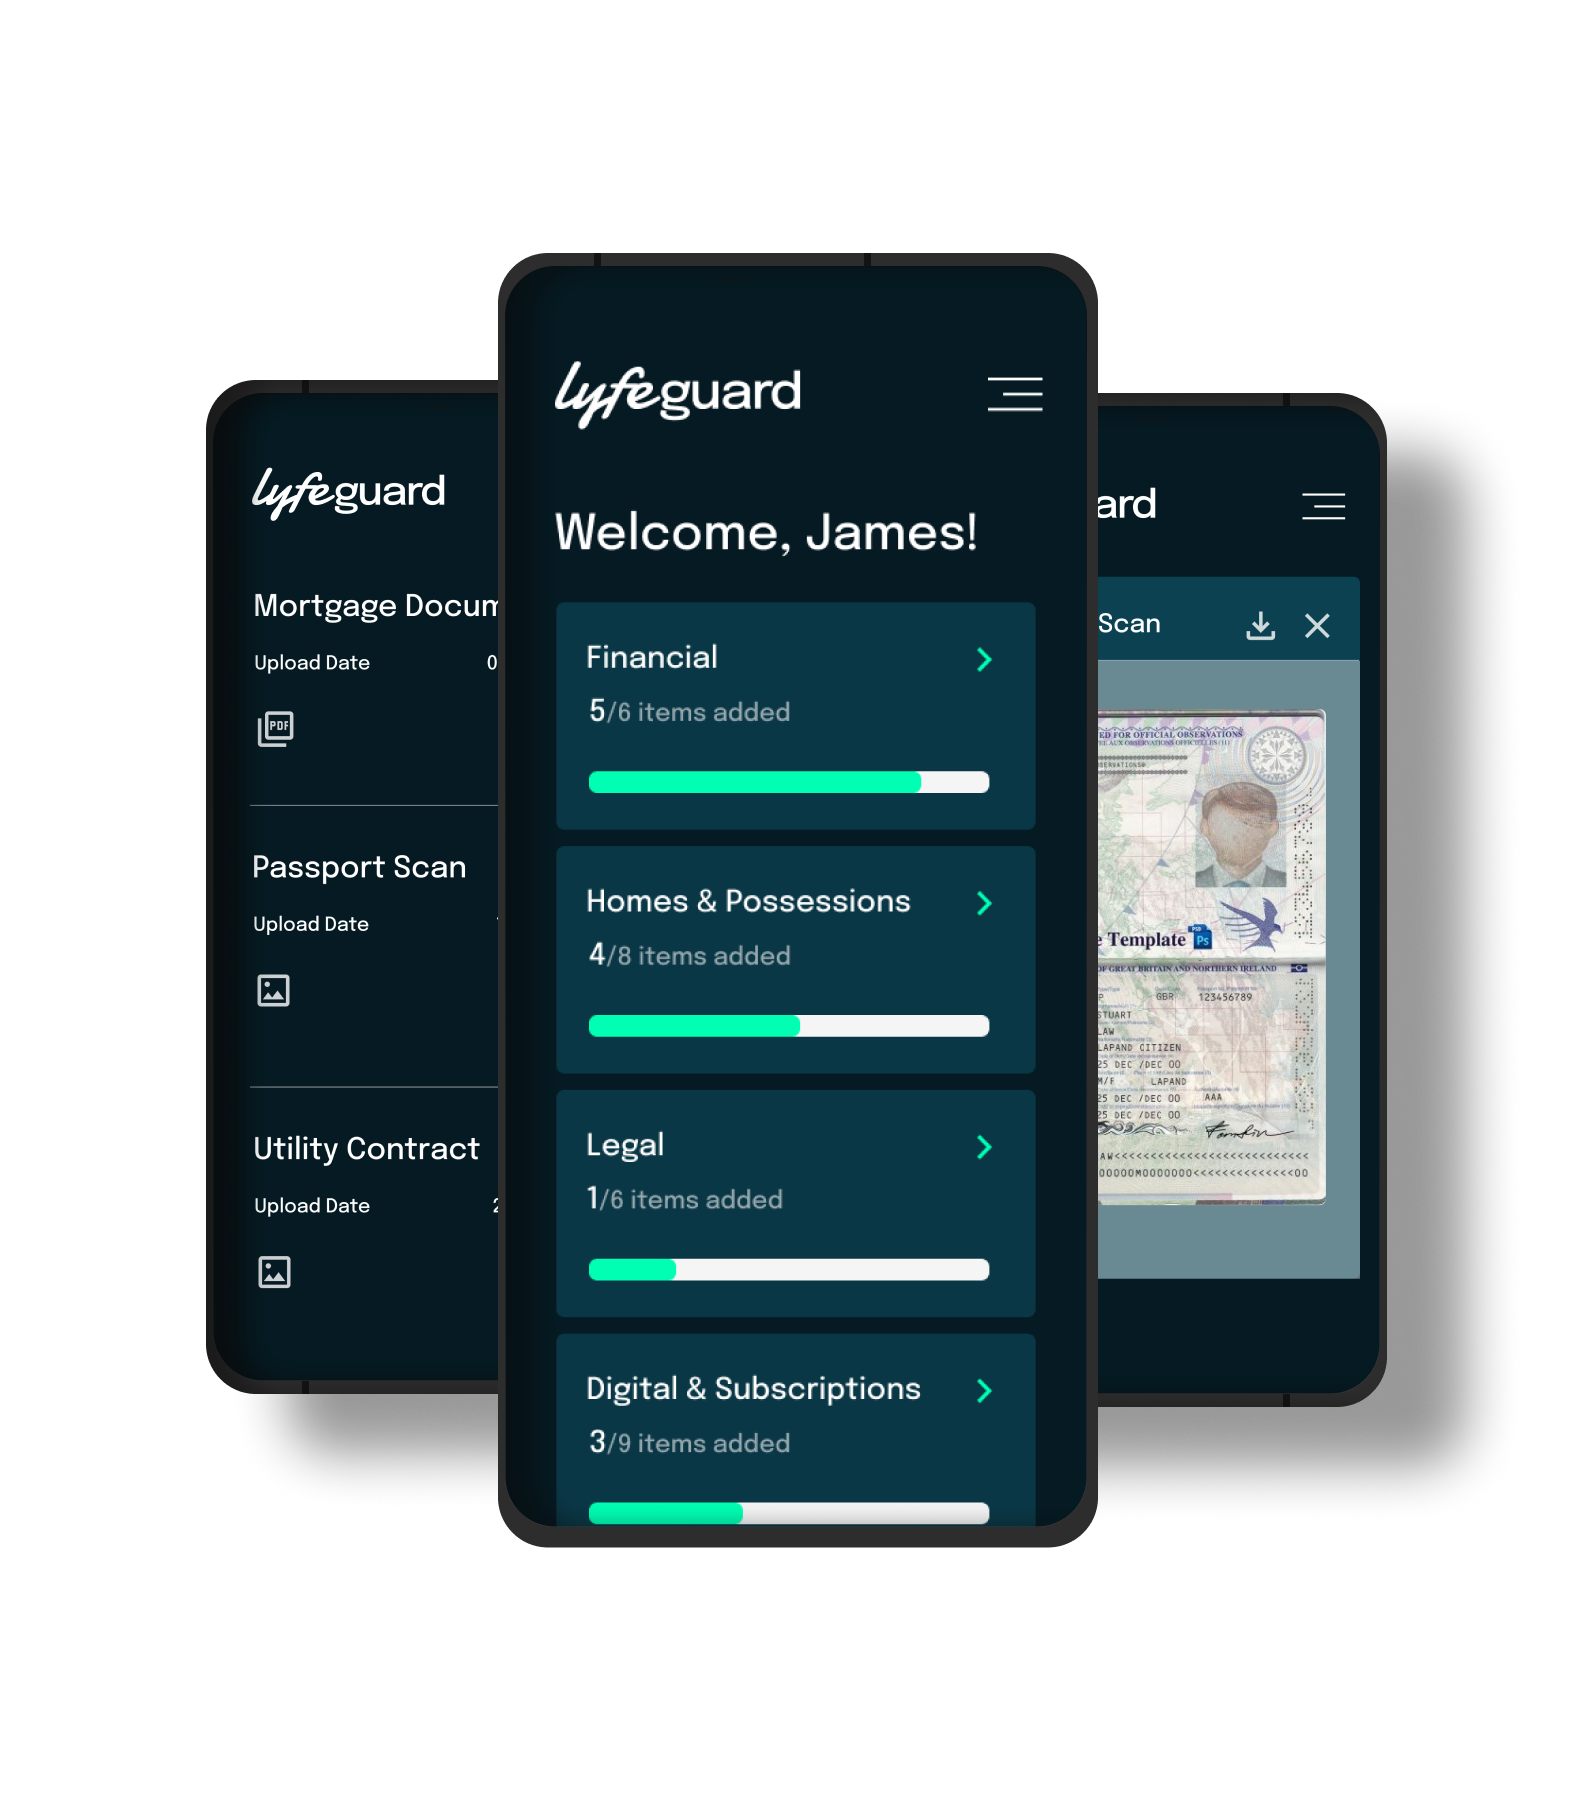 Lyfeguard's game-changing client portal